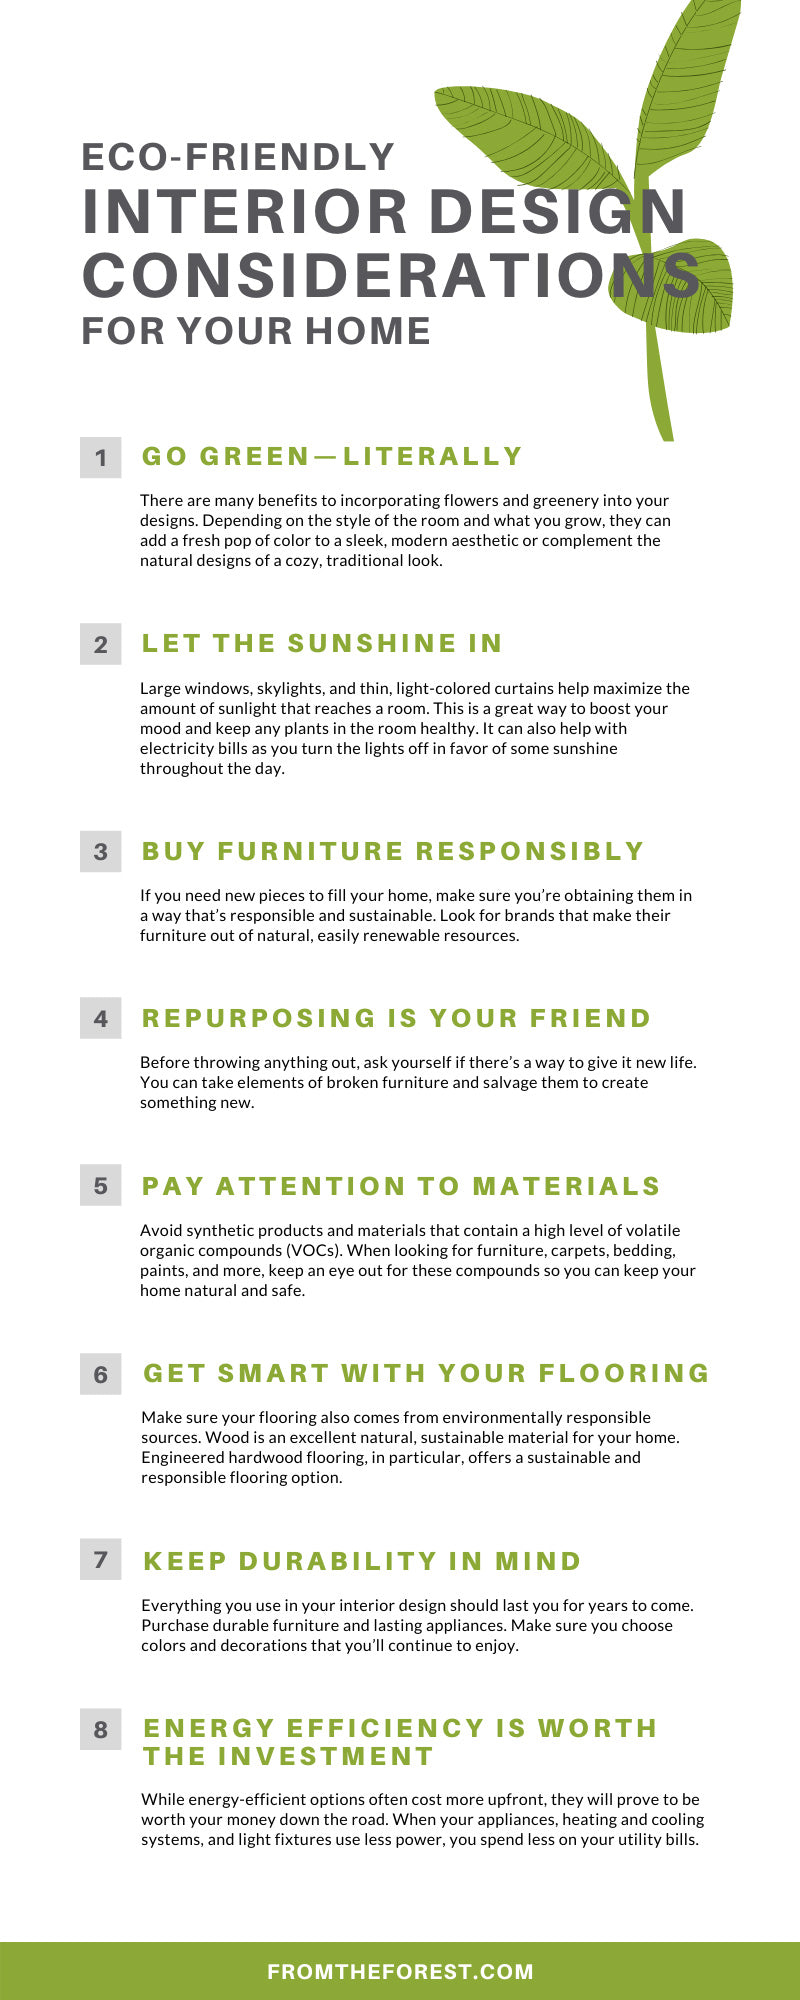 Eco-friendly Interior Design Considerations for Your Home